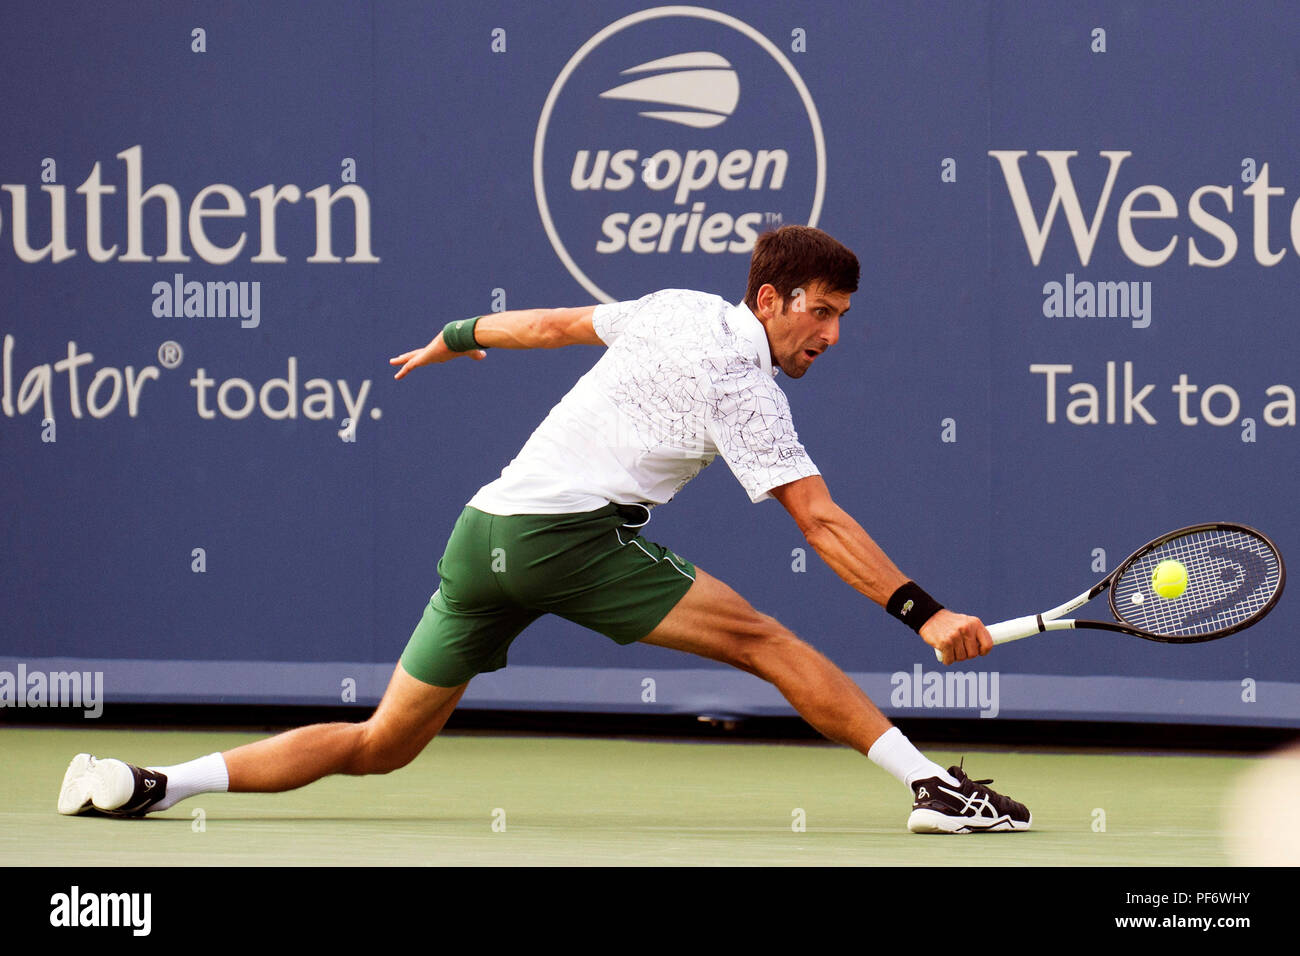 Mason, Ohio, USA. August 19, 2018: Novak Djokovic (SRB) hits the ball back to Roger Federer (SUI) at the Western Southern Open in Mason, Ohio, USA. Brent Clark/Alamy Live News Stock Photo